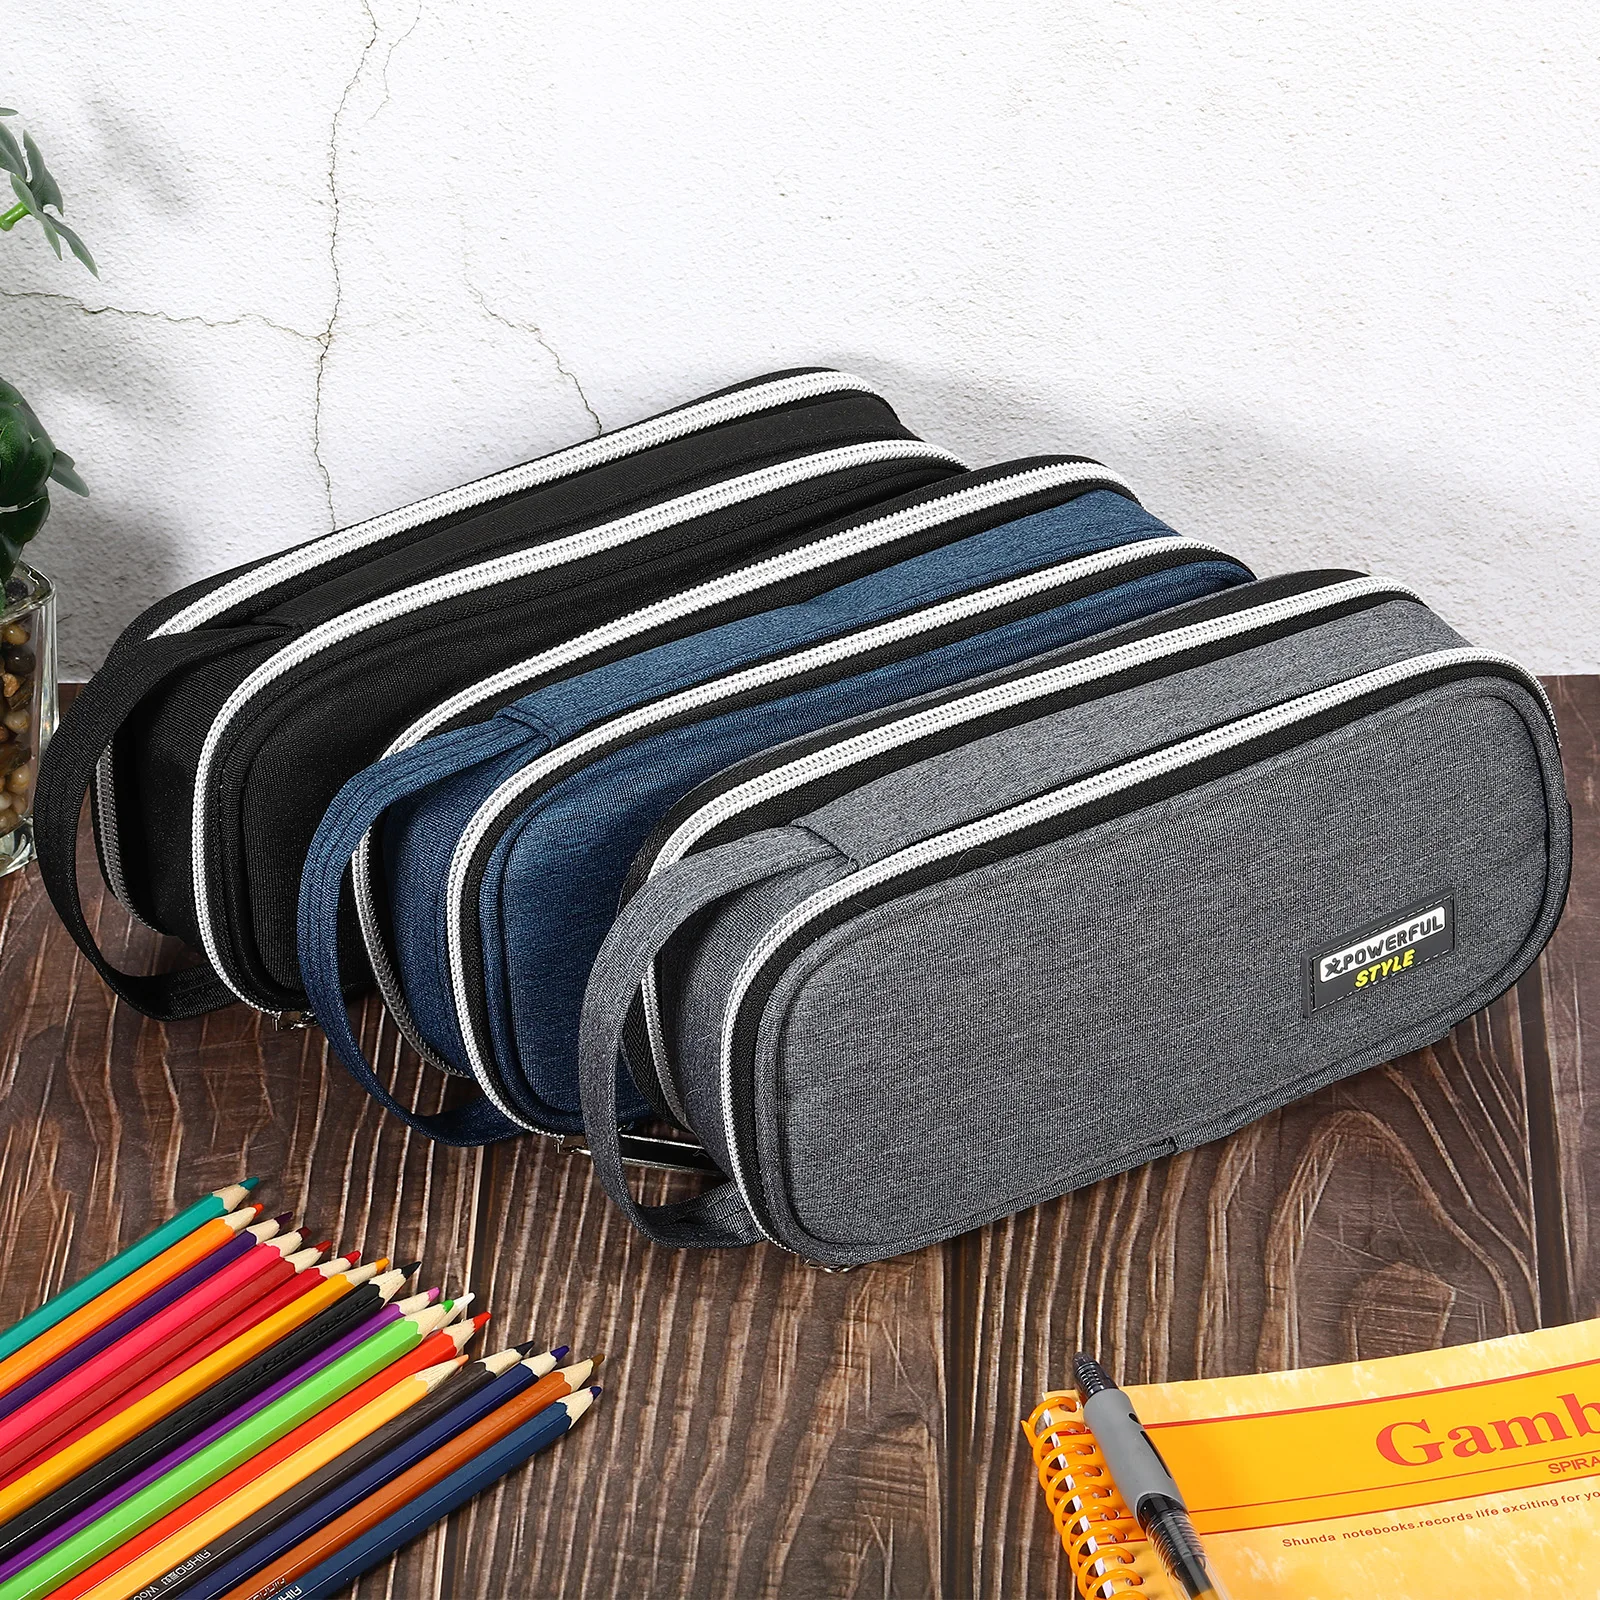 Kawaii Pencil Case Large Capacity Pencil Bag Canvas Pen Pouch Holder Stationery Desk Organizer Cosmetic Bag School Office Supply